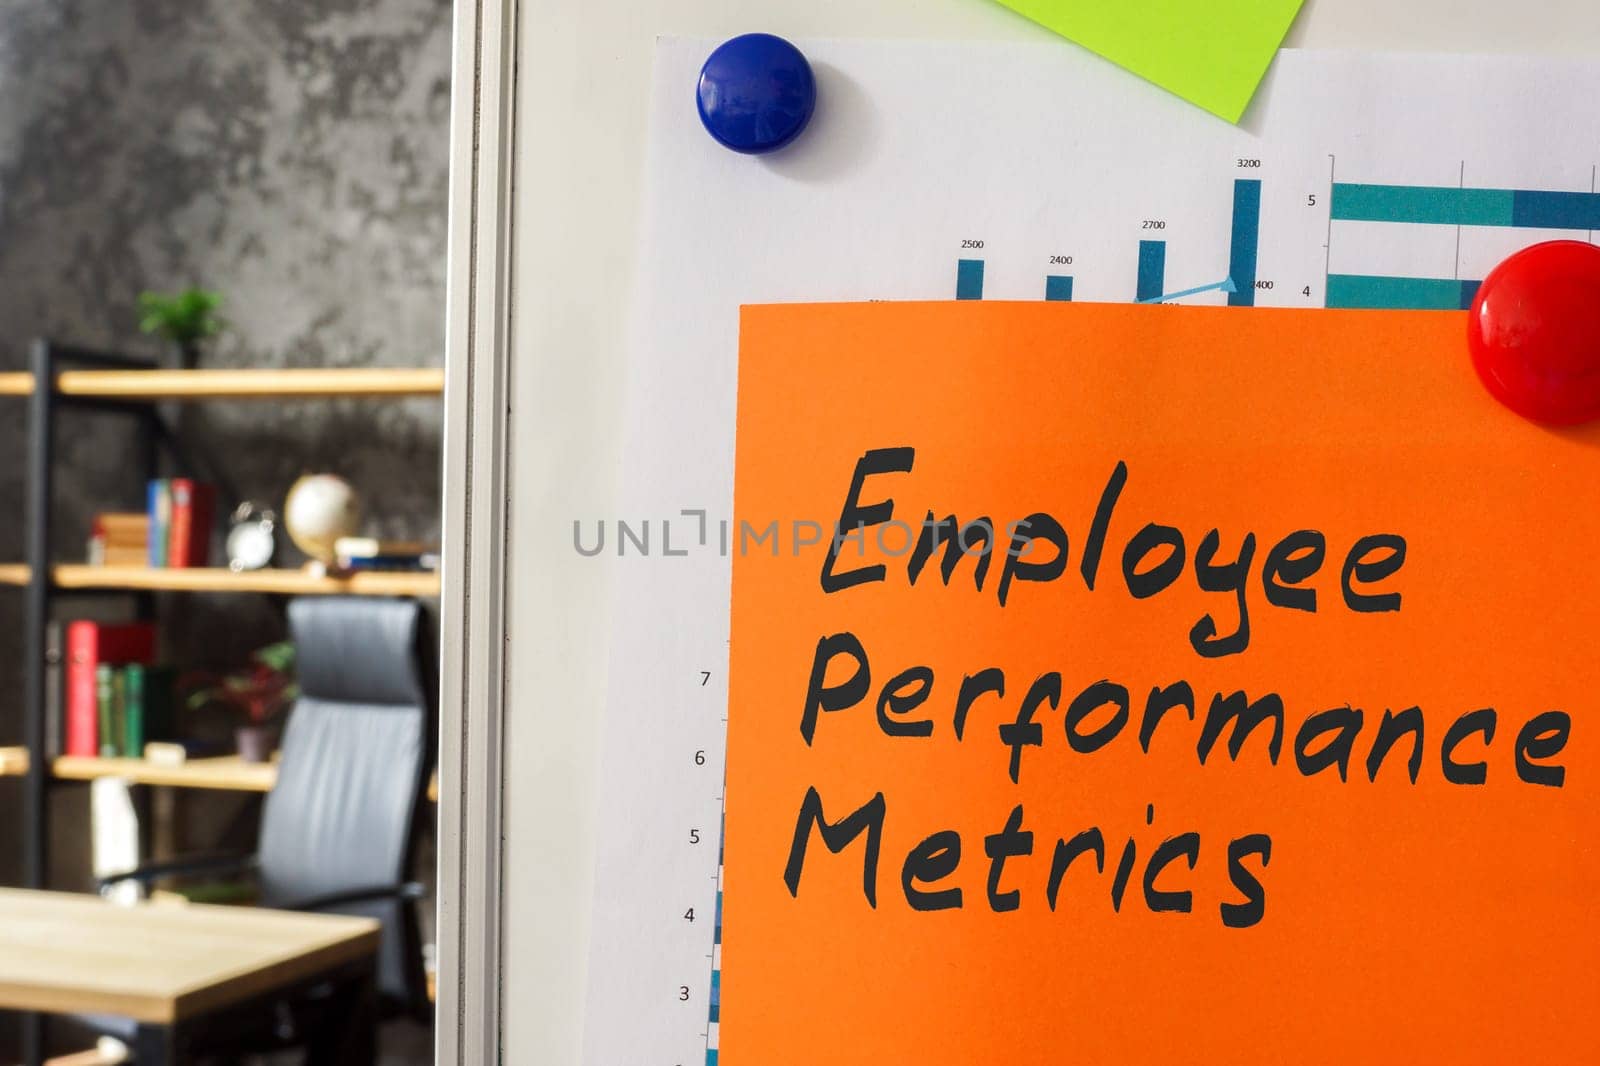 Employee performance metrics. A whiteboard with a chart and sheet attached. by designer491